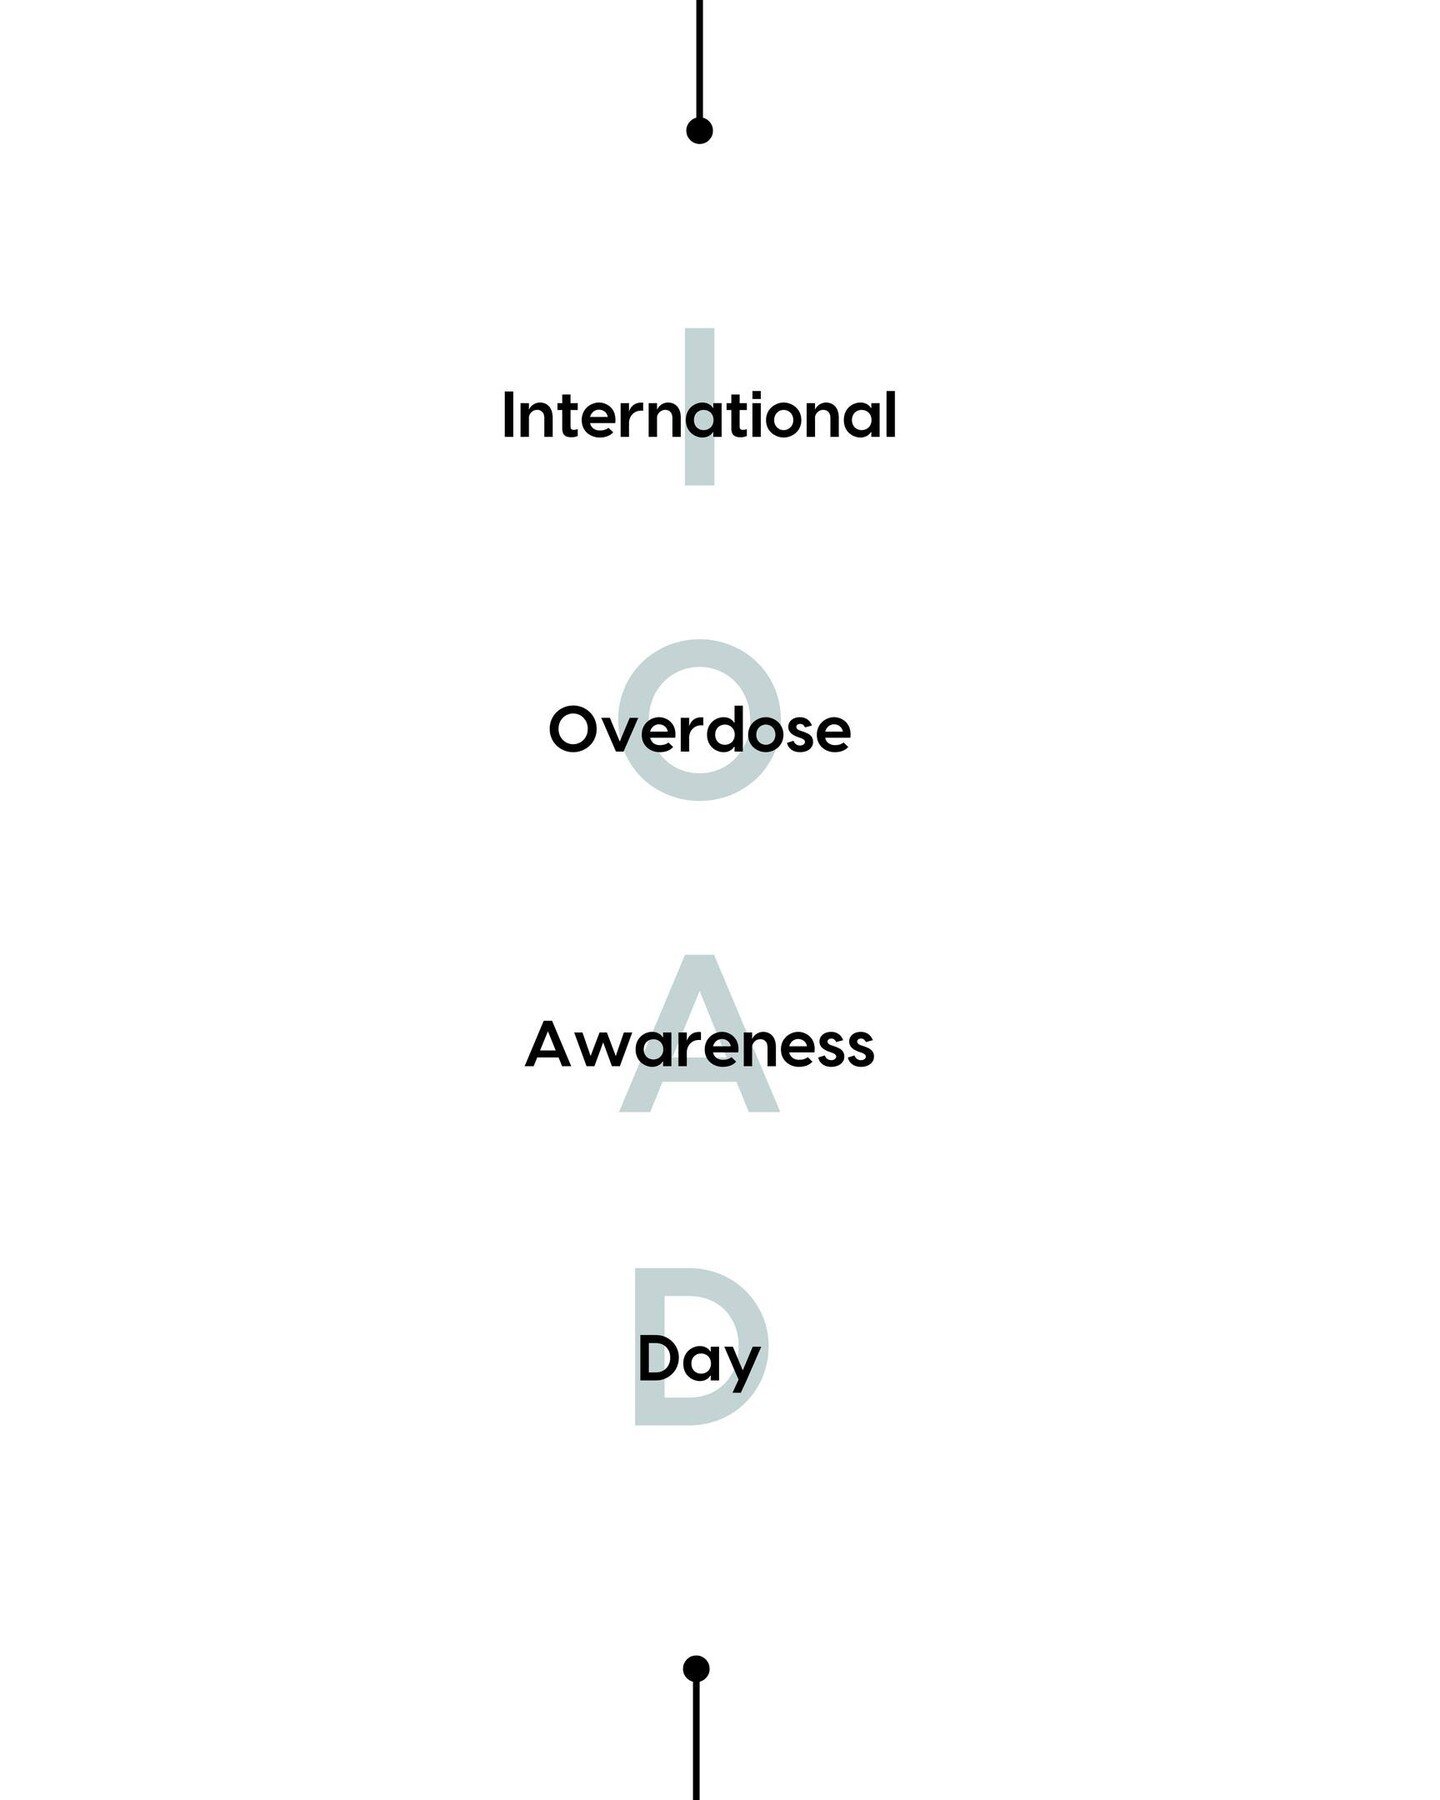 Today is International Overdose Awareness Day. It's a day to come together to remember those who've lost their lives to overdose, and to support those who are struggling with addiction.⁠
⁠
We know that addiction is a disease that can affect anyone&md